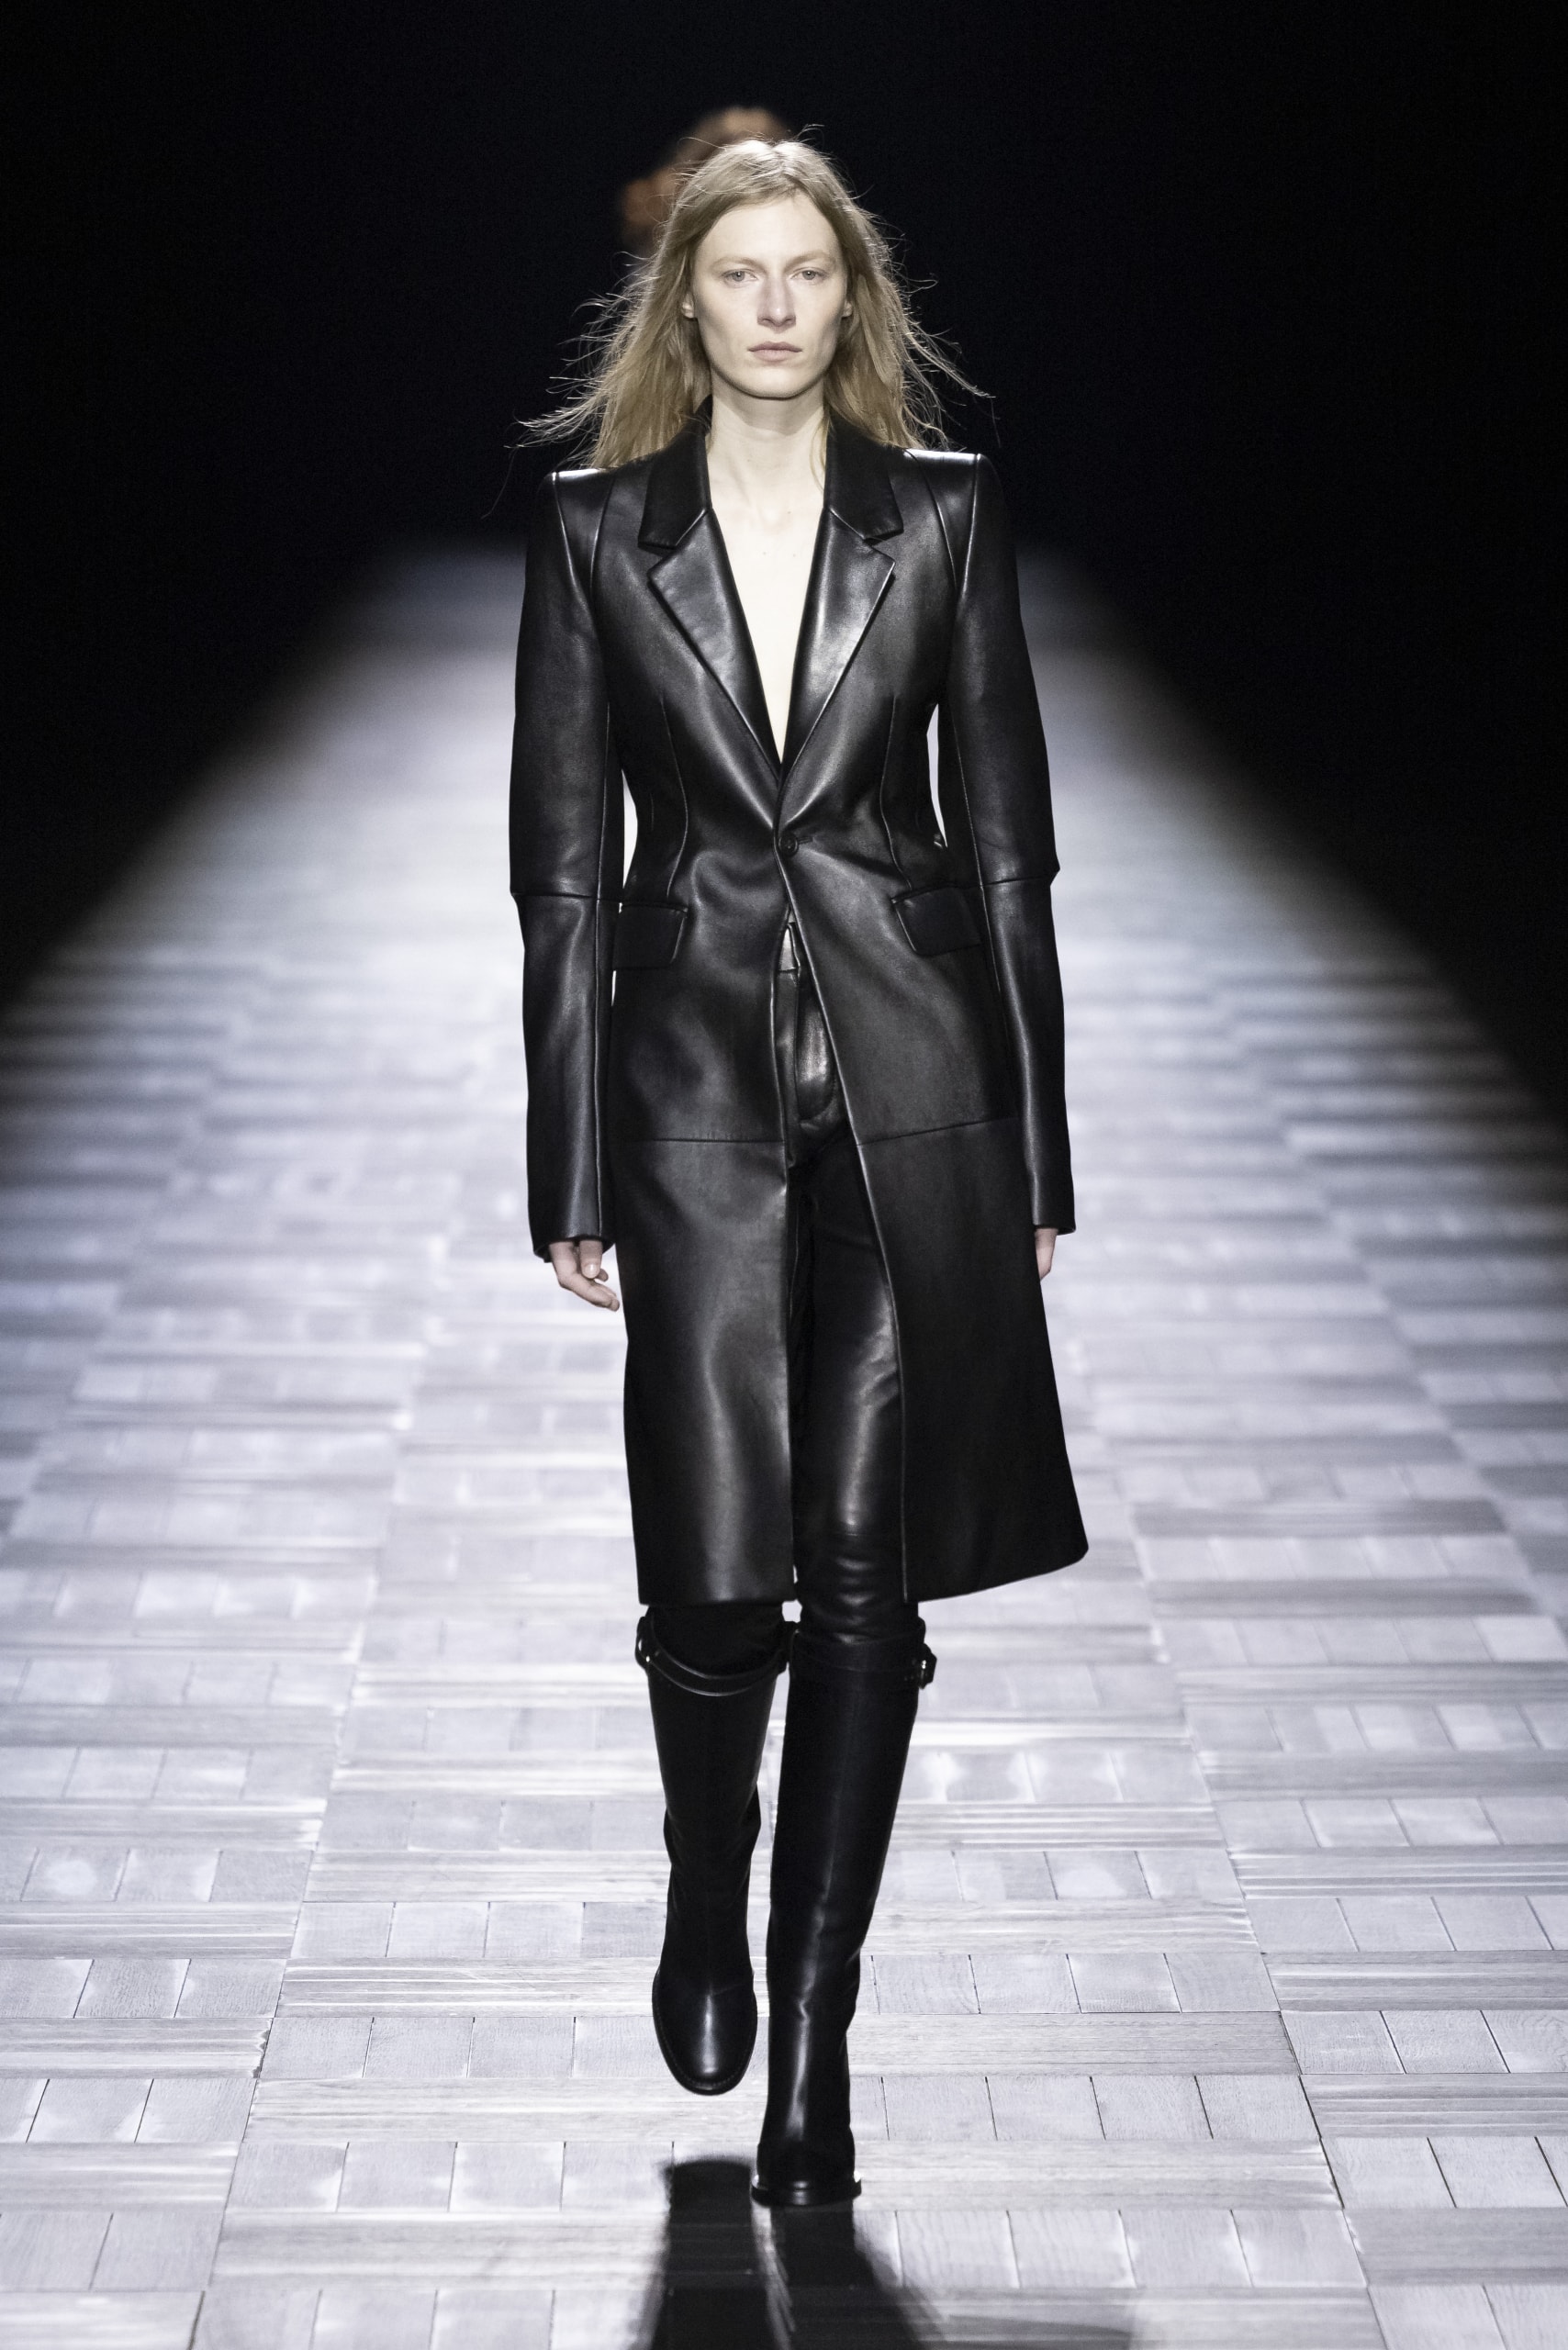 Ann Demeulemeester steps up relaunch as special guest of Pitti Uomo